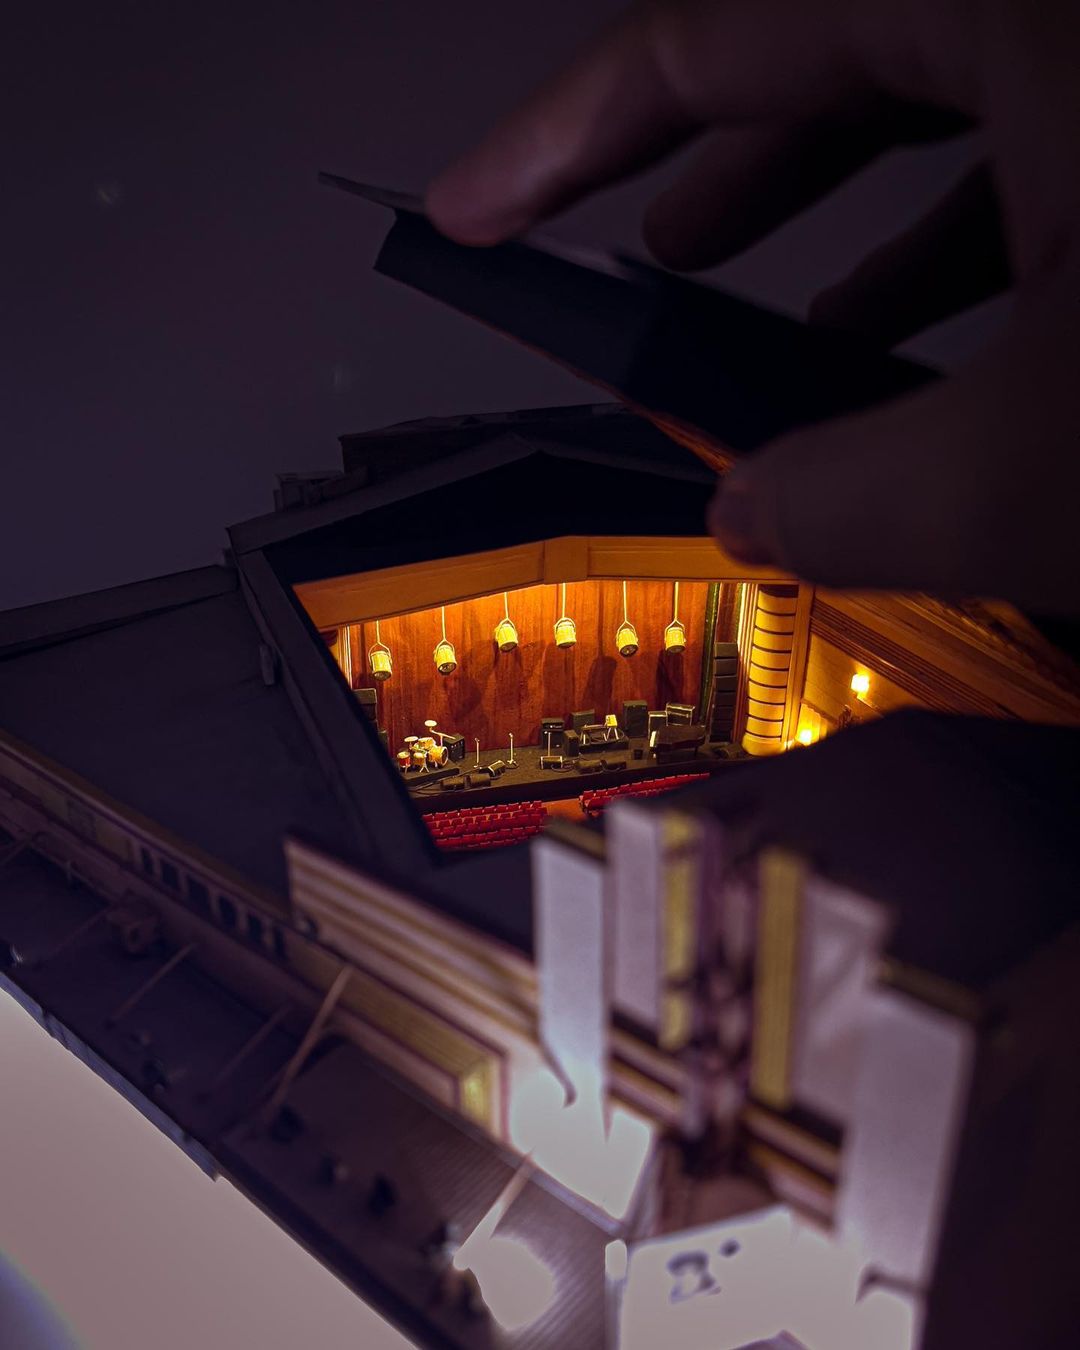 Whimsical Everyday Life And Historical Buildings In Miniature By Mylyn Nguyen (12)